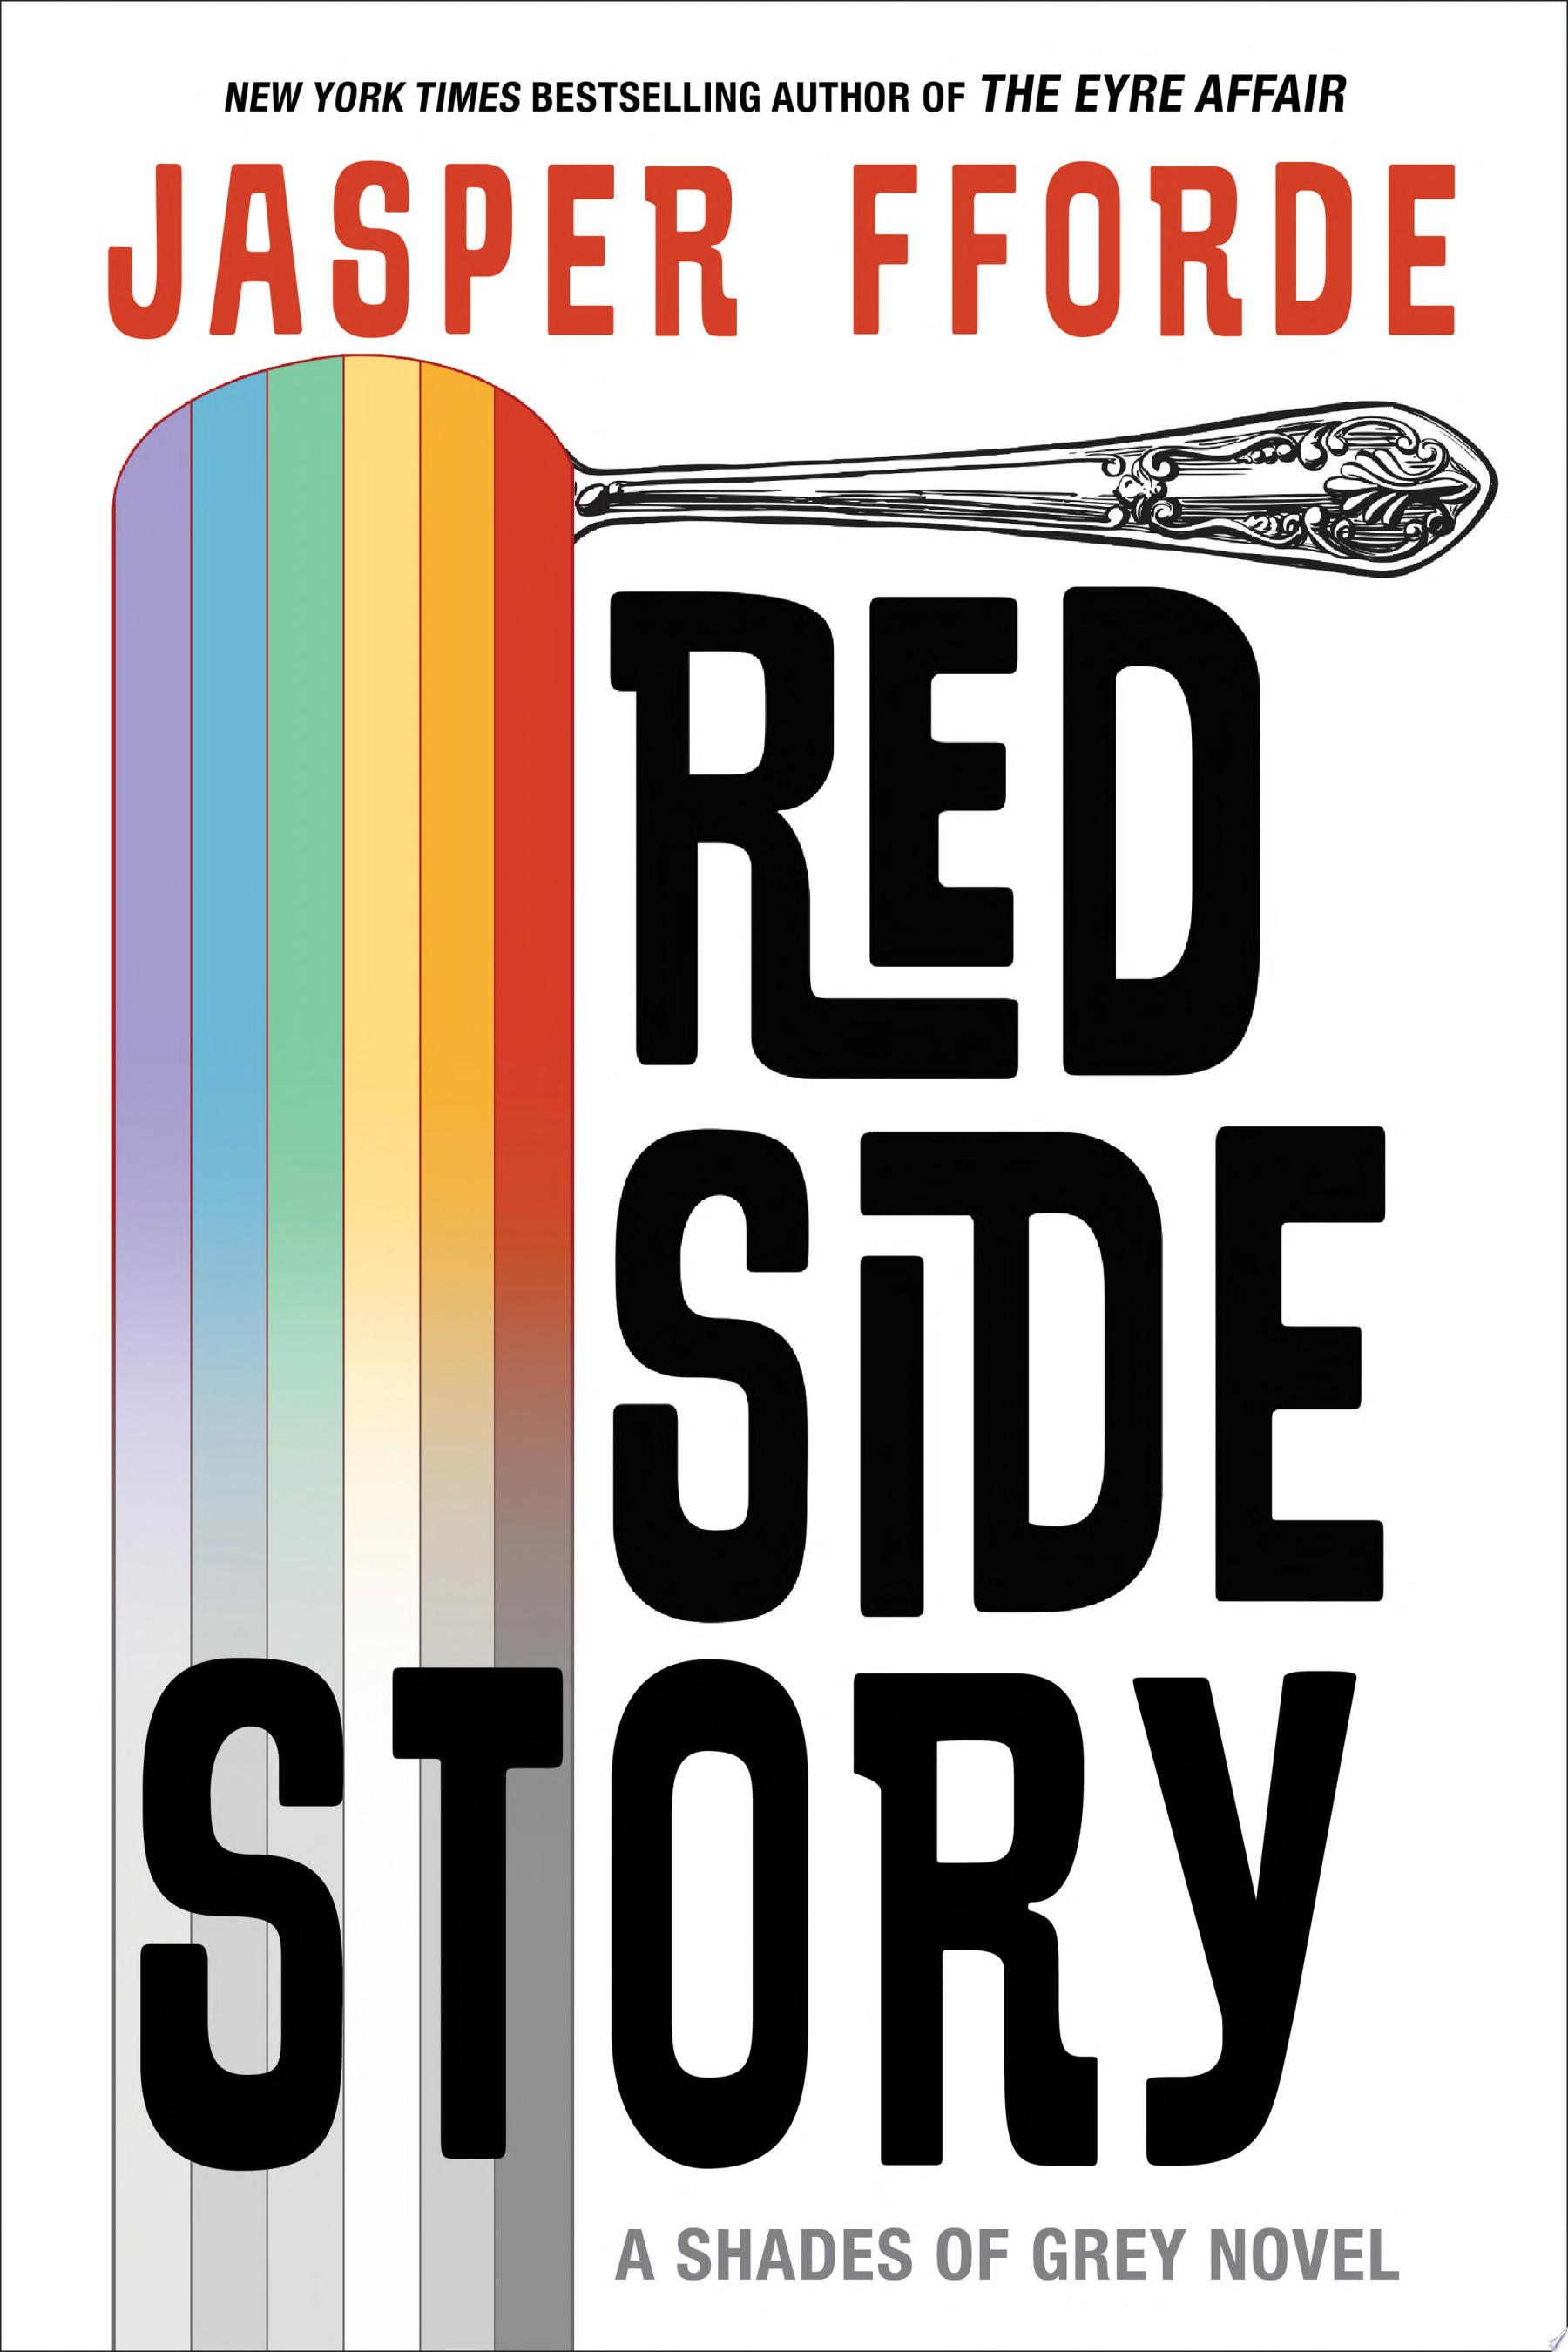 Book Cover for "Red Side Story"